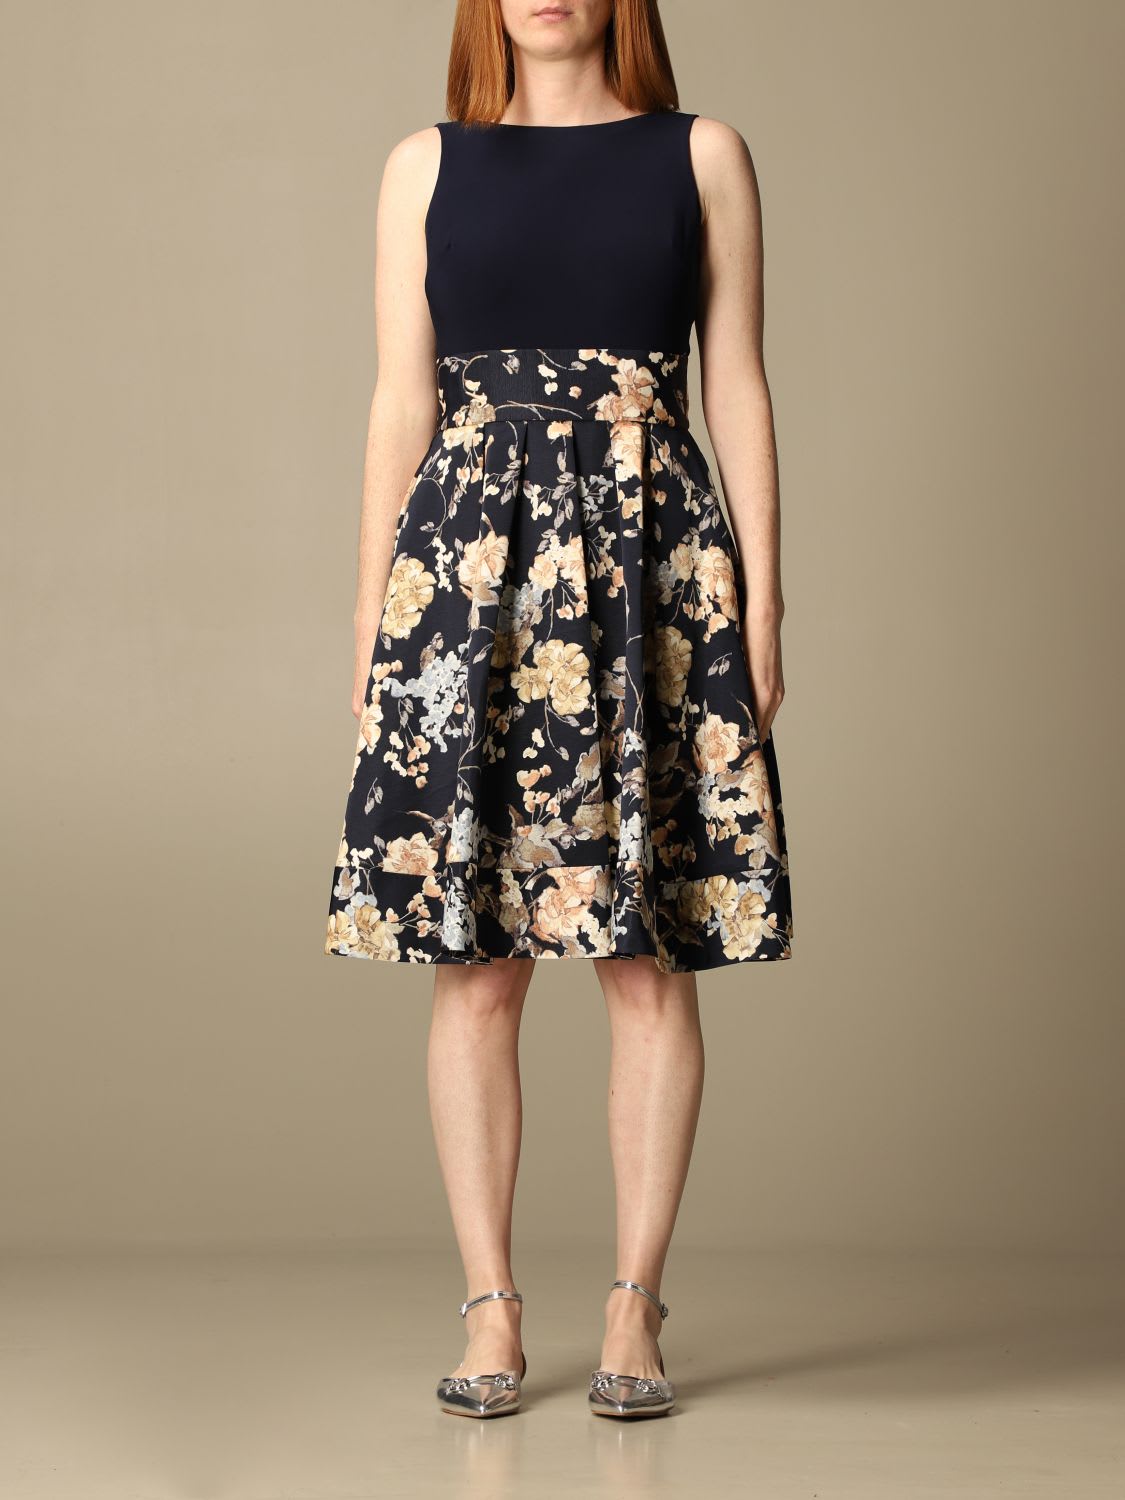 Lauren Ralph Lauren Dress Lauren Ralph Lauren Dress With Patterned Skirt